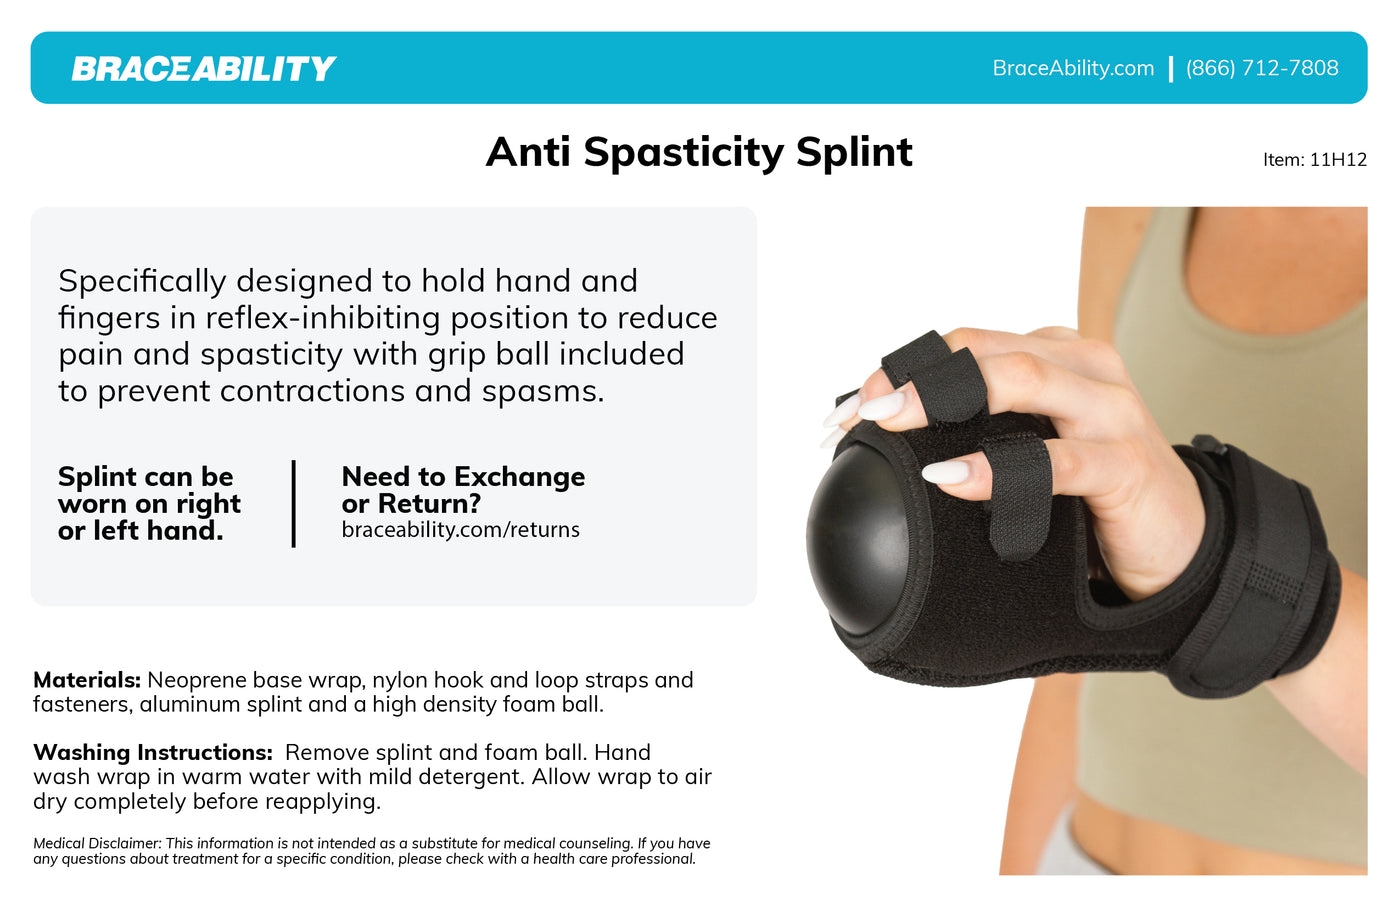 To clean the anti spasticity splint, remove the metal splint and foam ball then hand wash the wrap in warm water with mild detergent